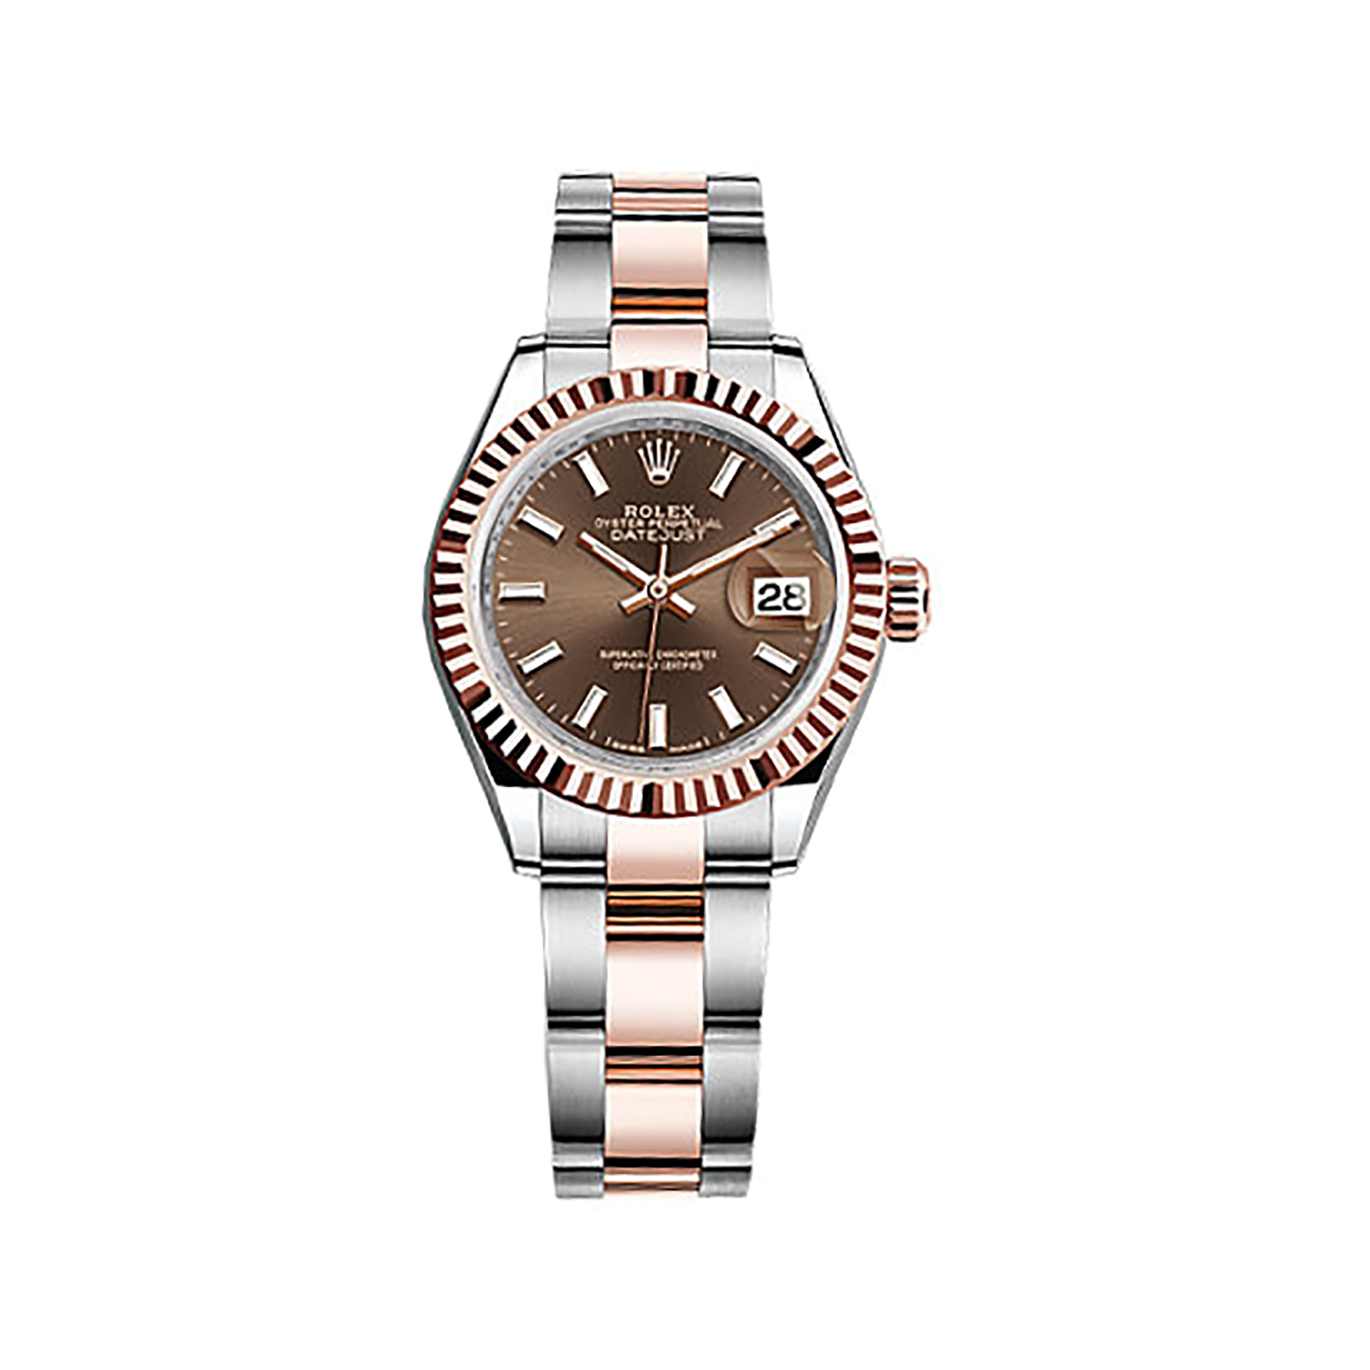 Lady-Datejust 28 279171 Rose Gold & Stainless Steel Watch (Chocolate)